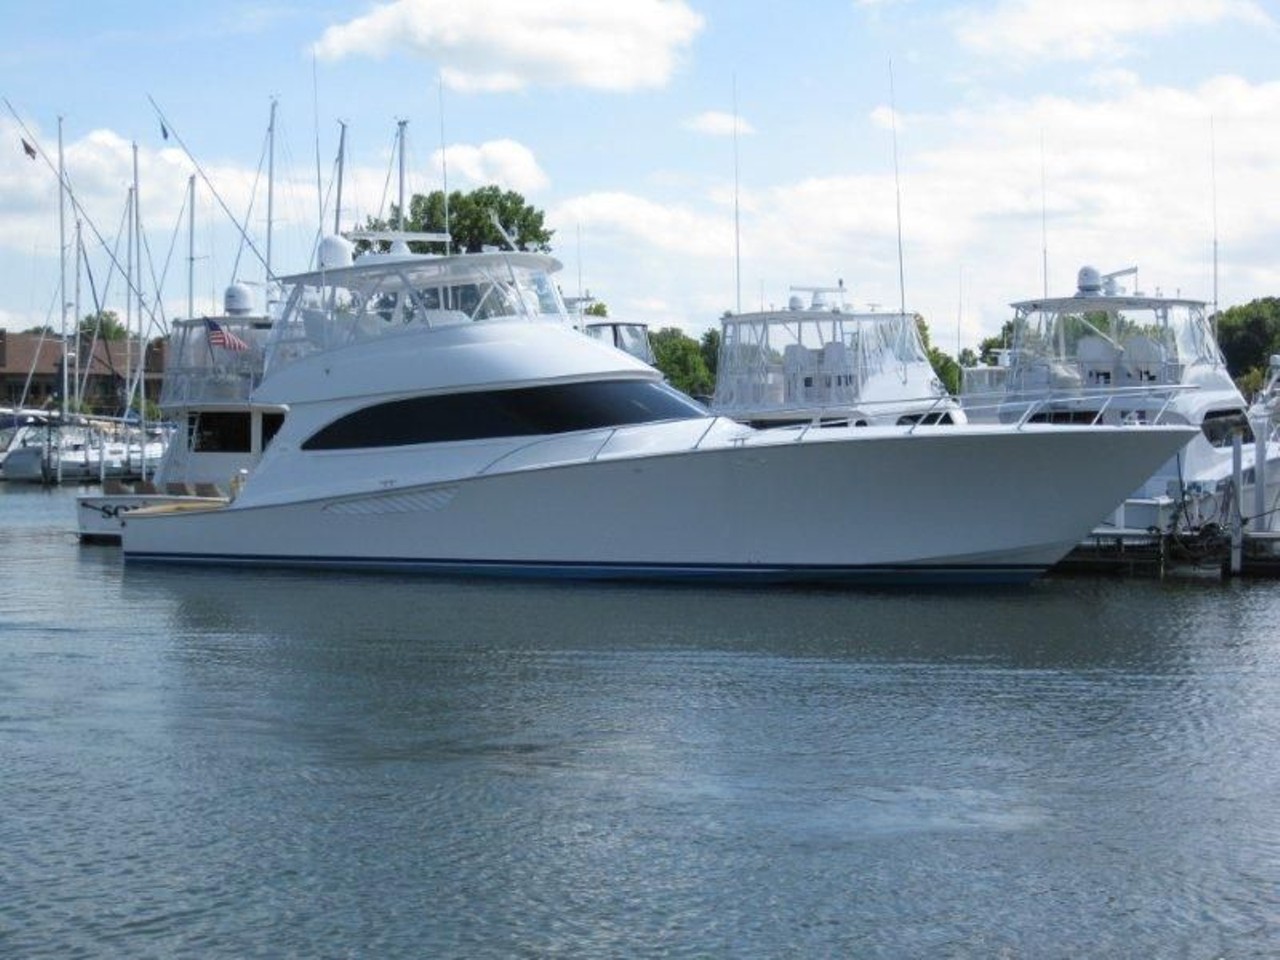 This 2013 Viking 66 Convertible, located in Catawba Island, OH, is listed for a cool $3,465,000.